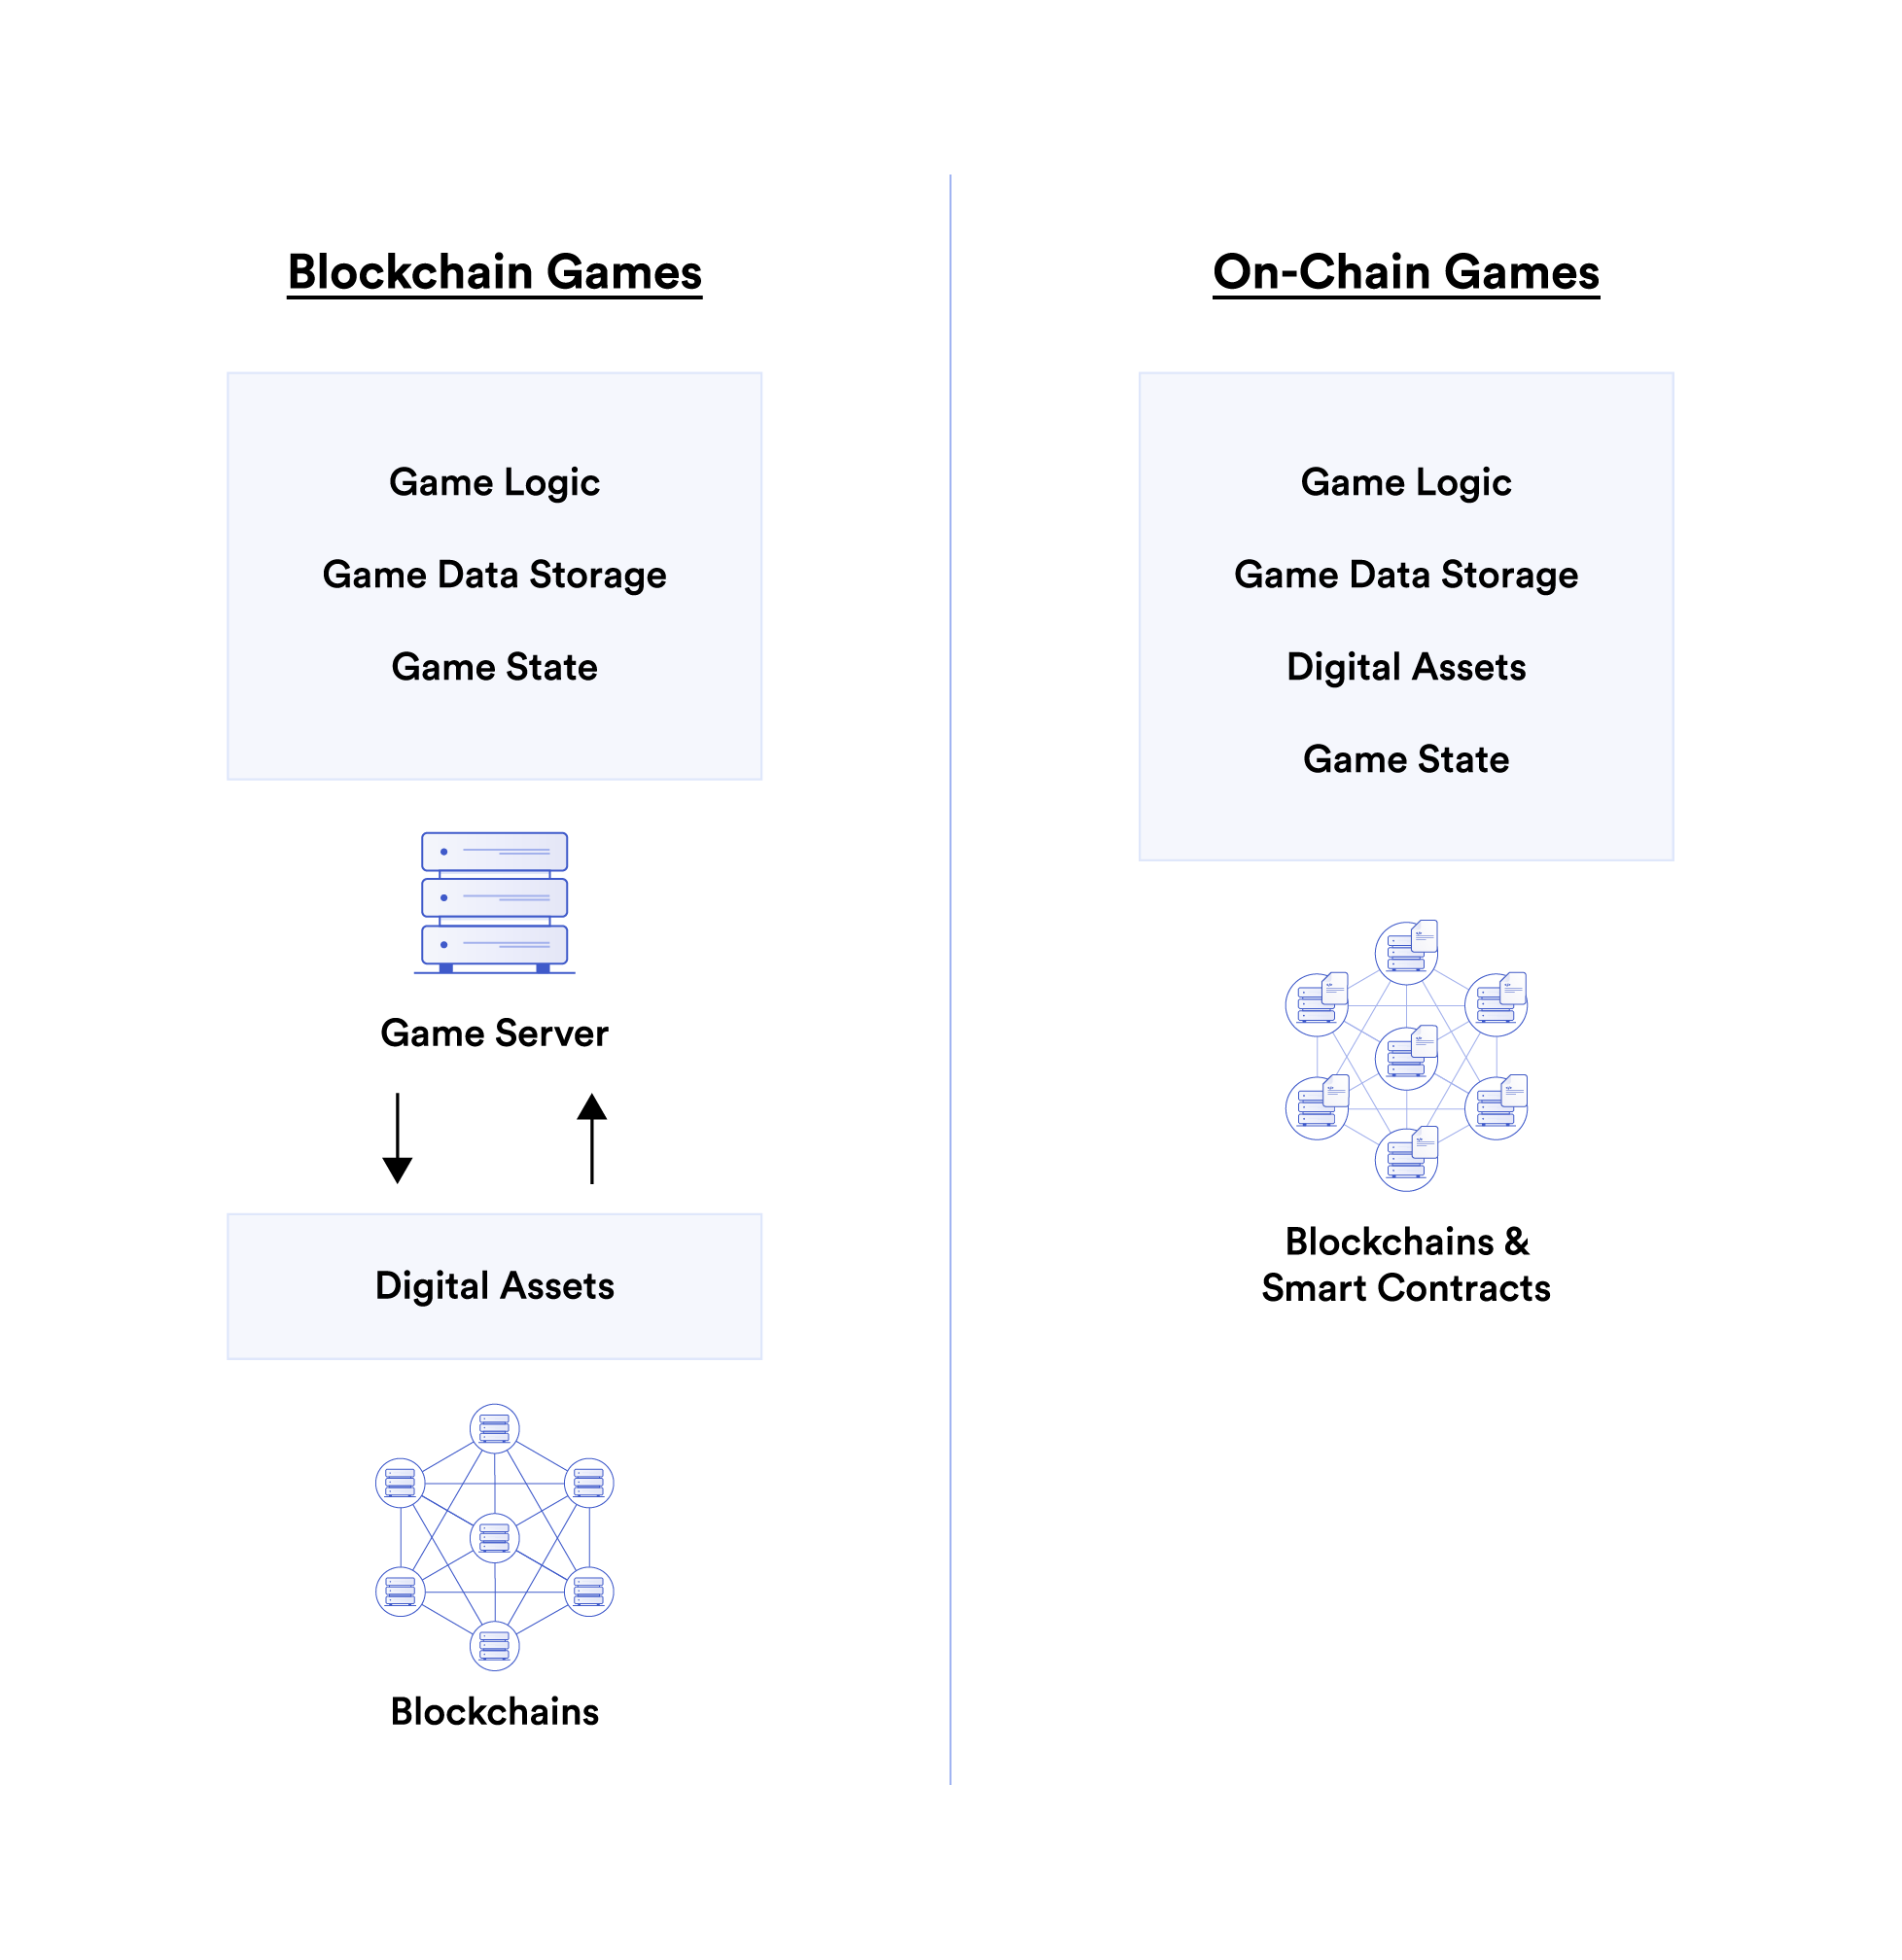 A diagram showing the technical differences between traditional blockchain games and on-chain games.